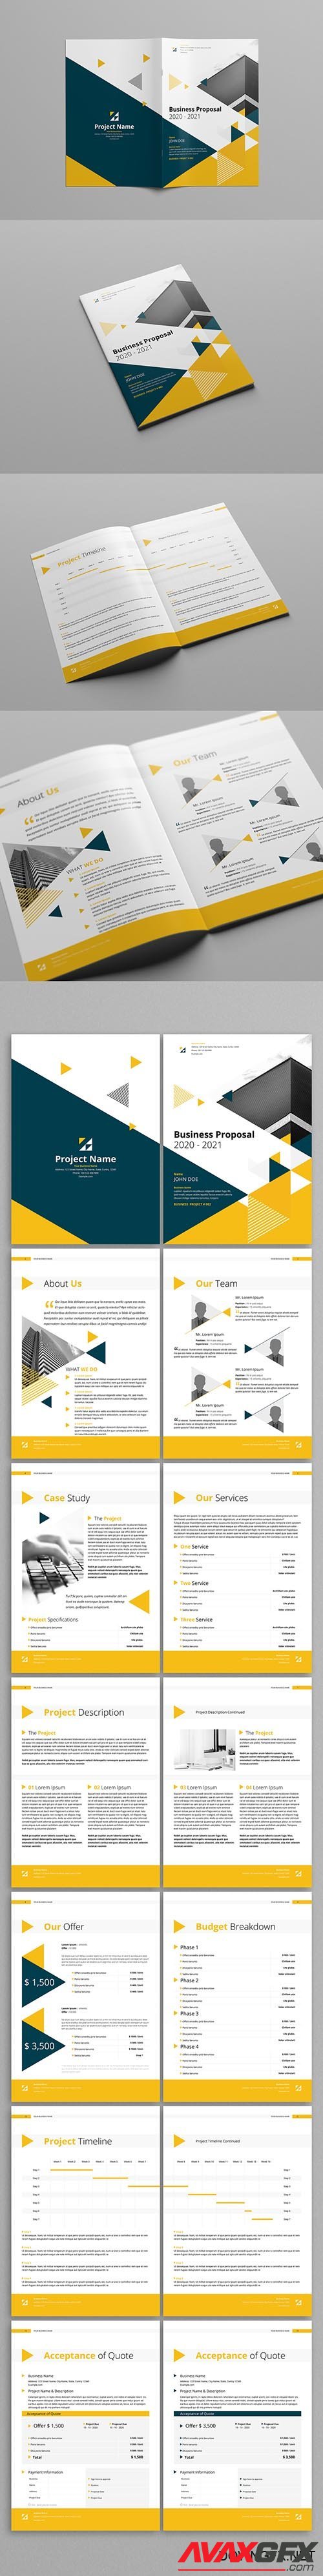 Yellow And Gray Booklet Layout 205399121